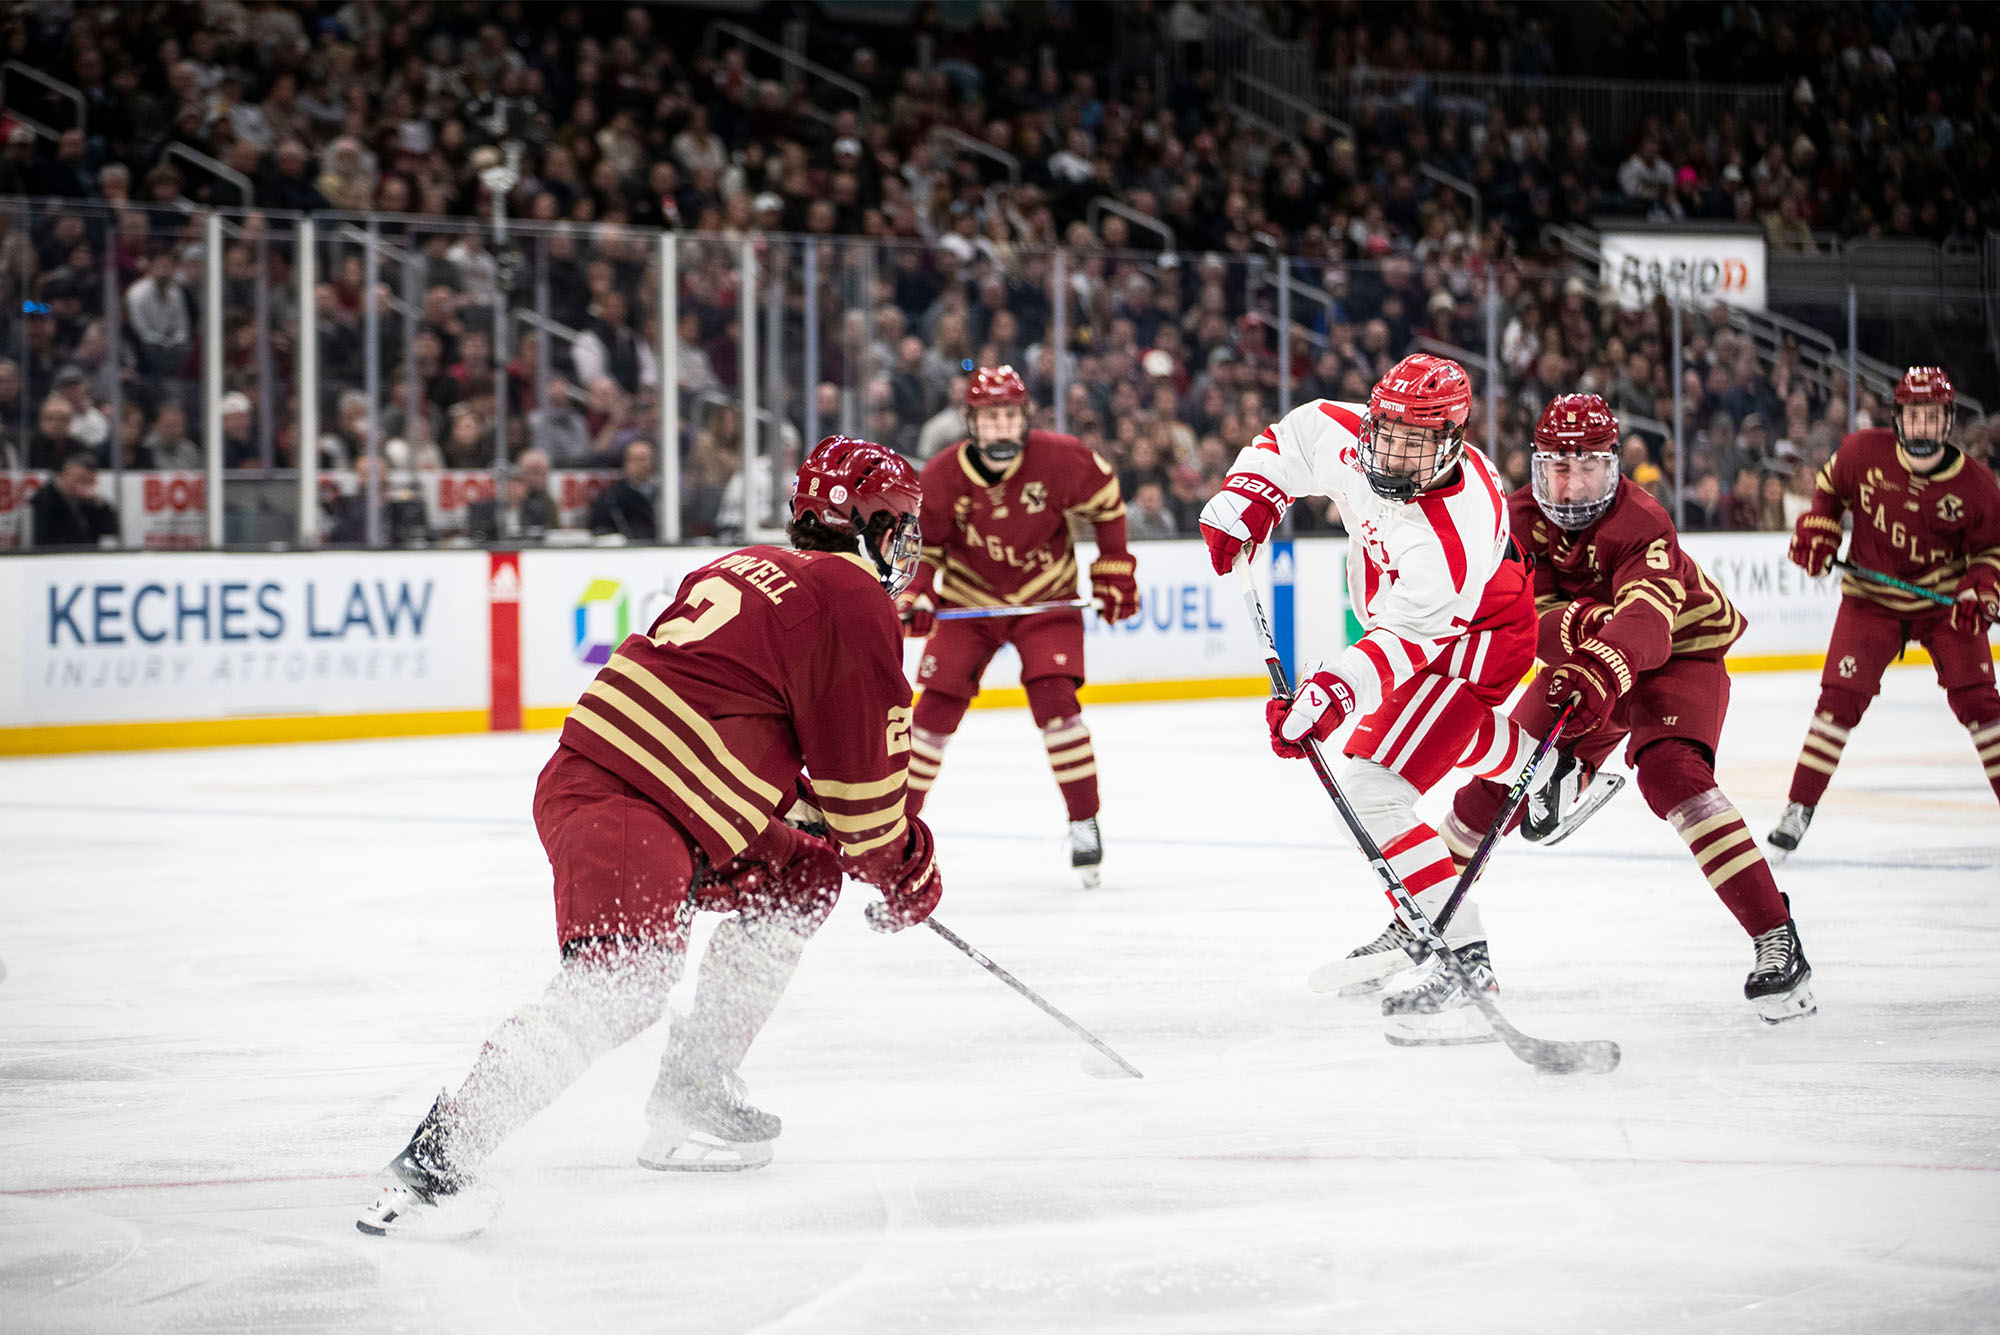 Photo: A BU college hockey player in a red and white jersey skates past players in dark maroon jerseys to fire a shot on net